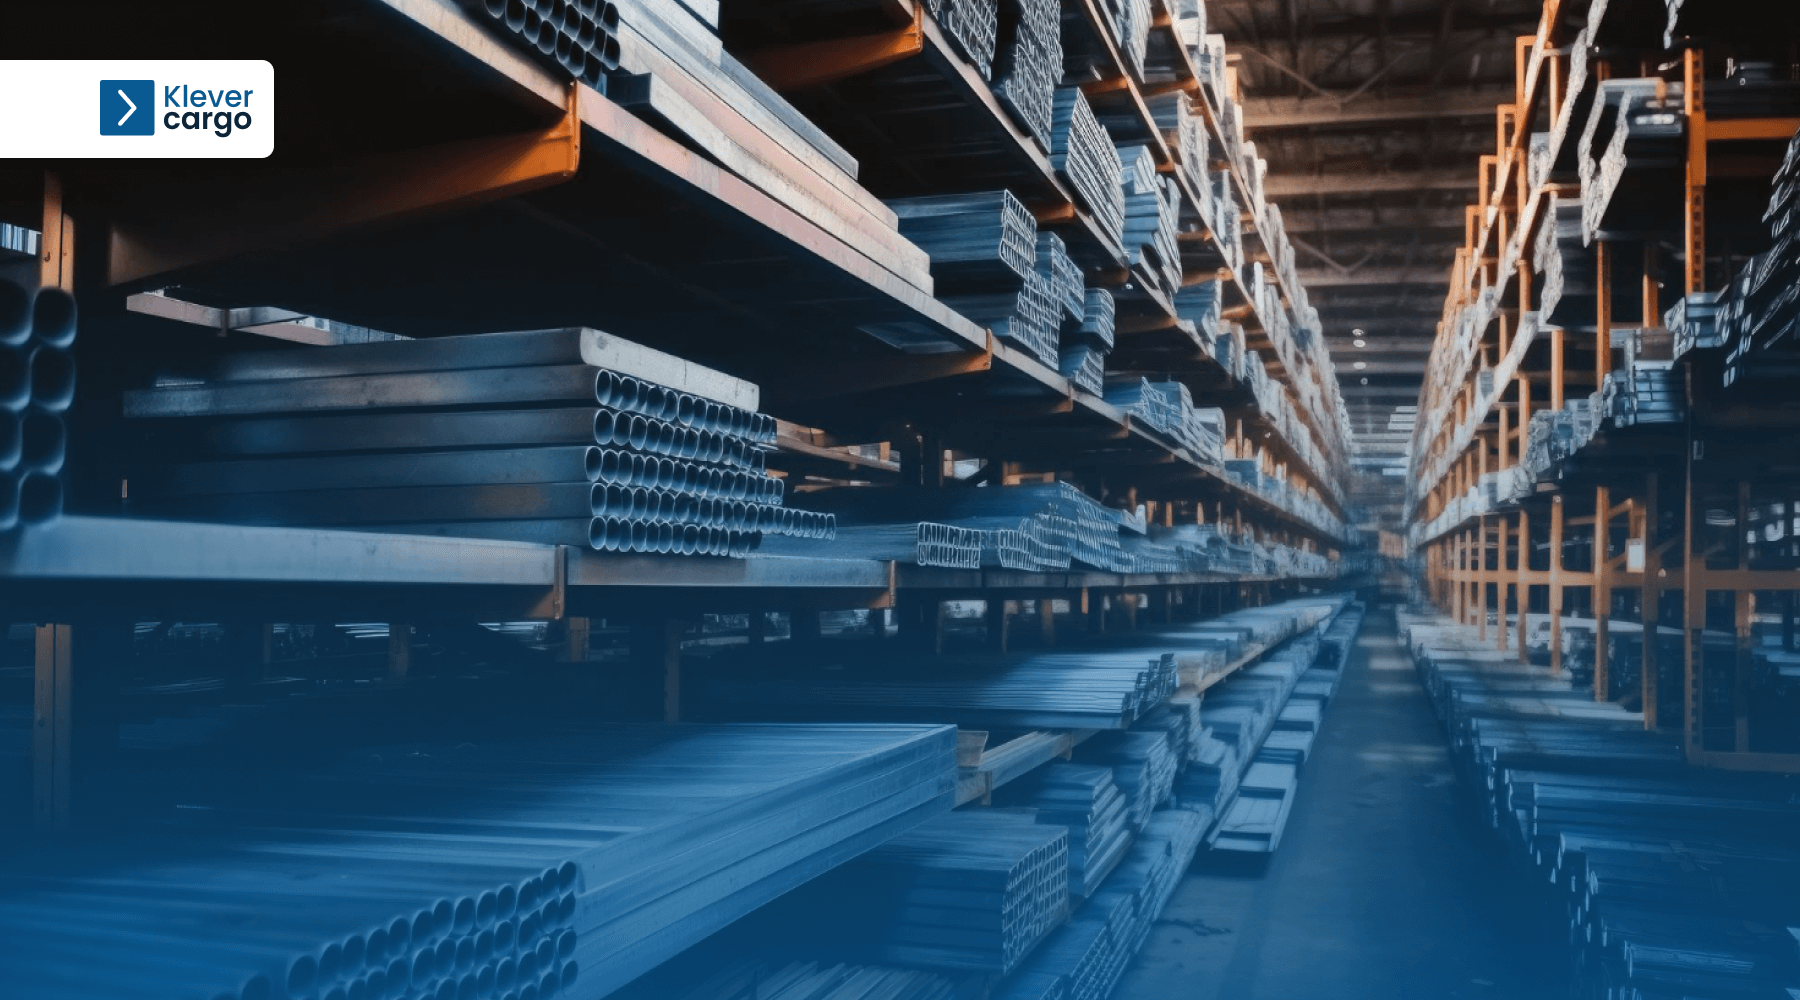 steel supply chain industry warehouse steel products